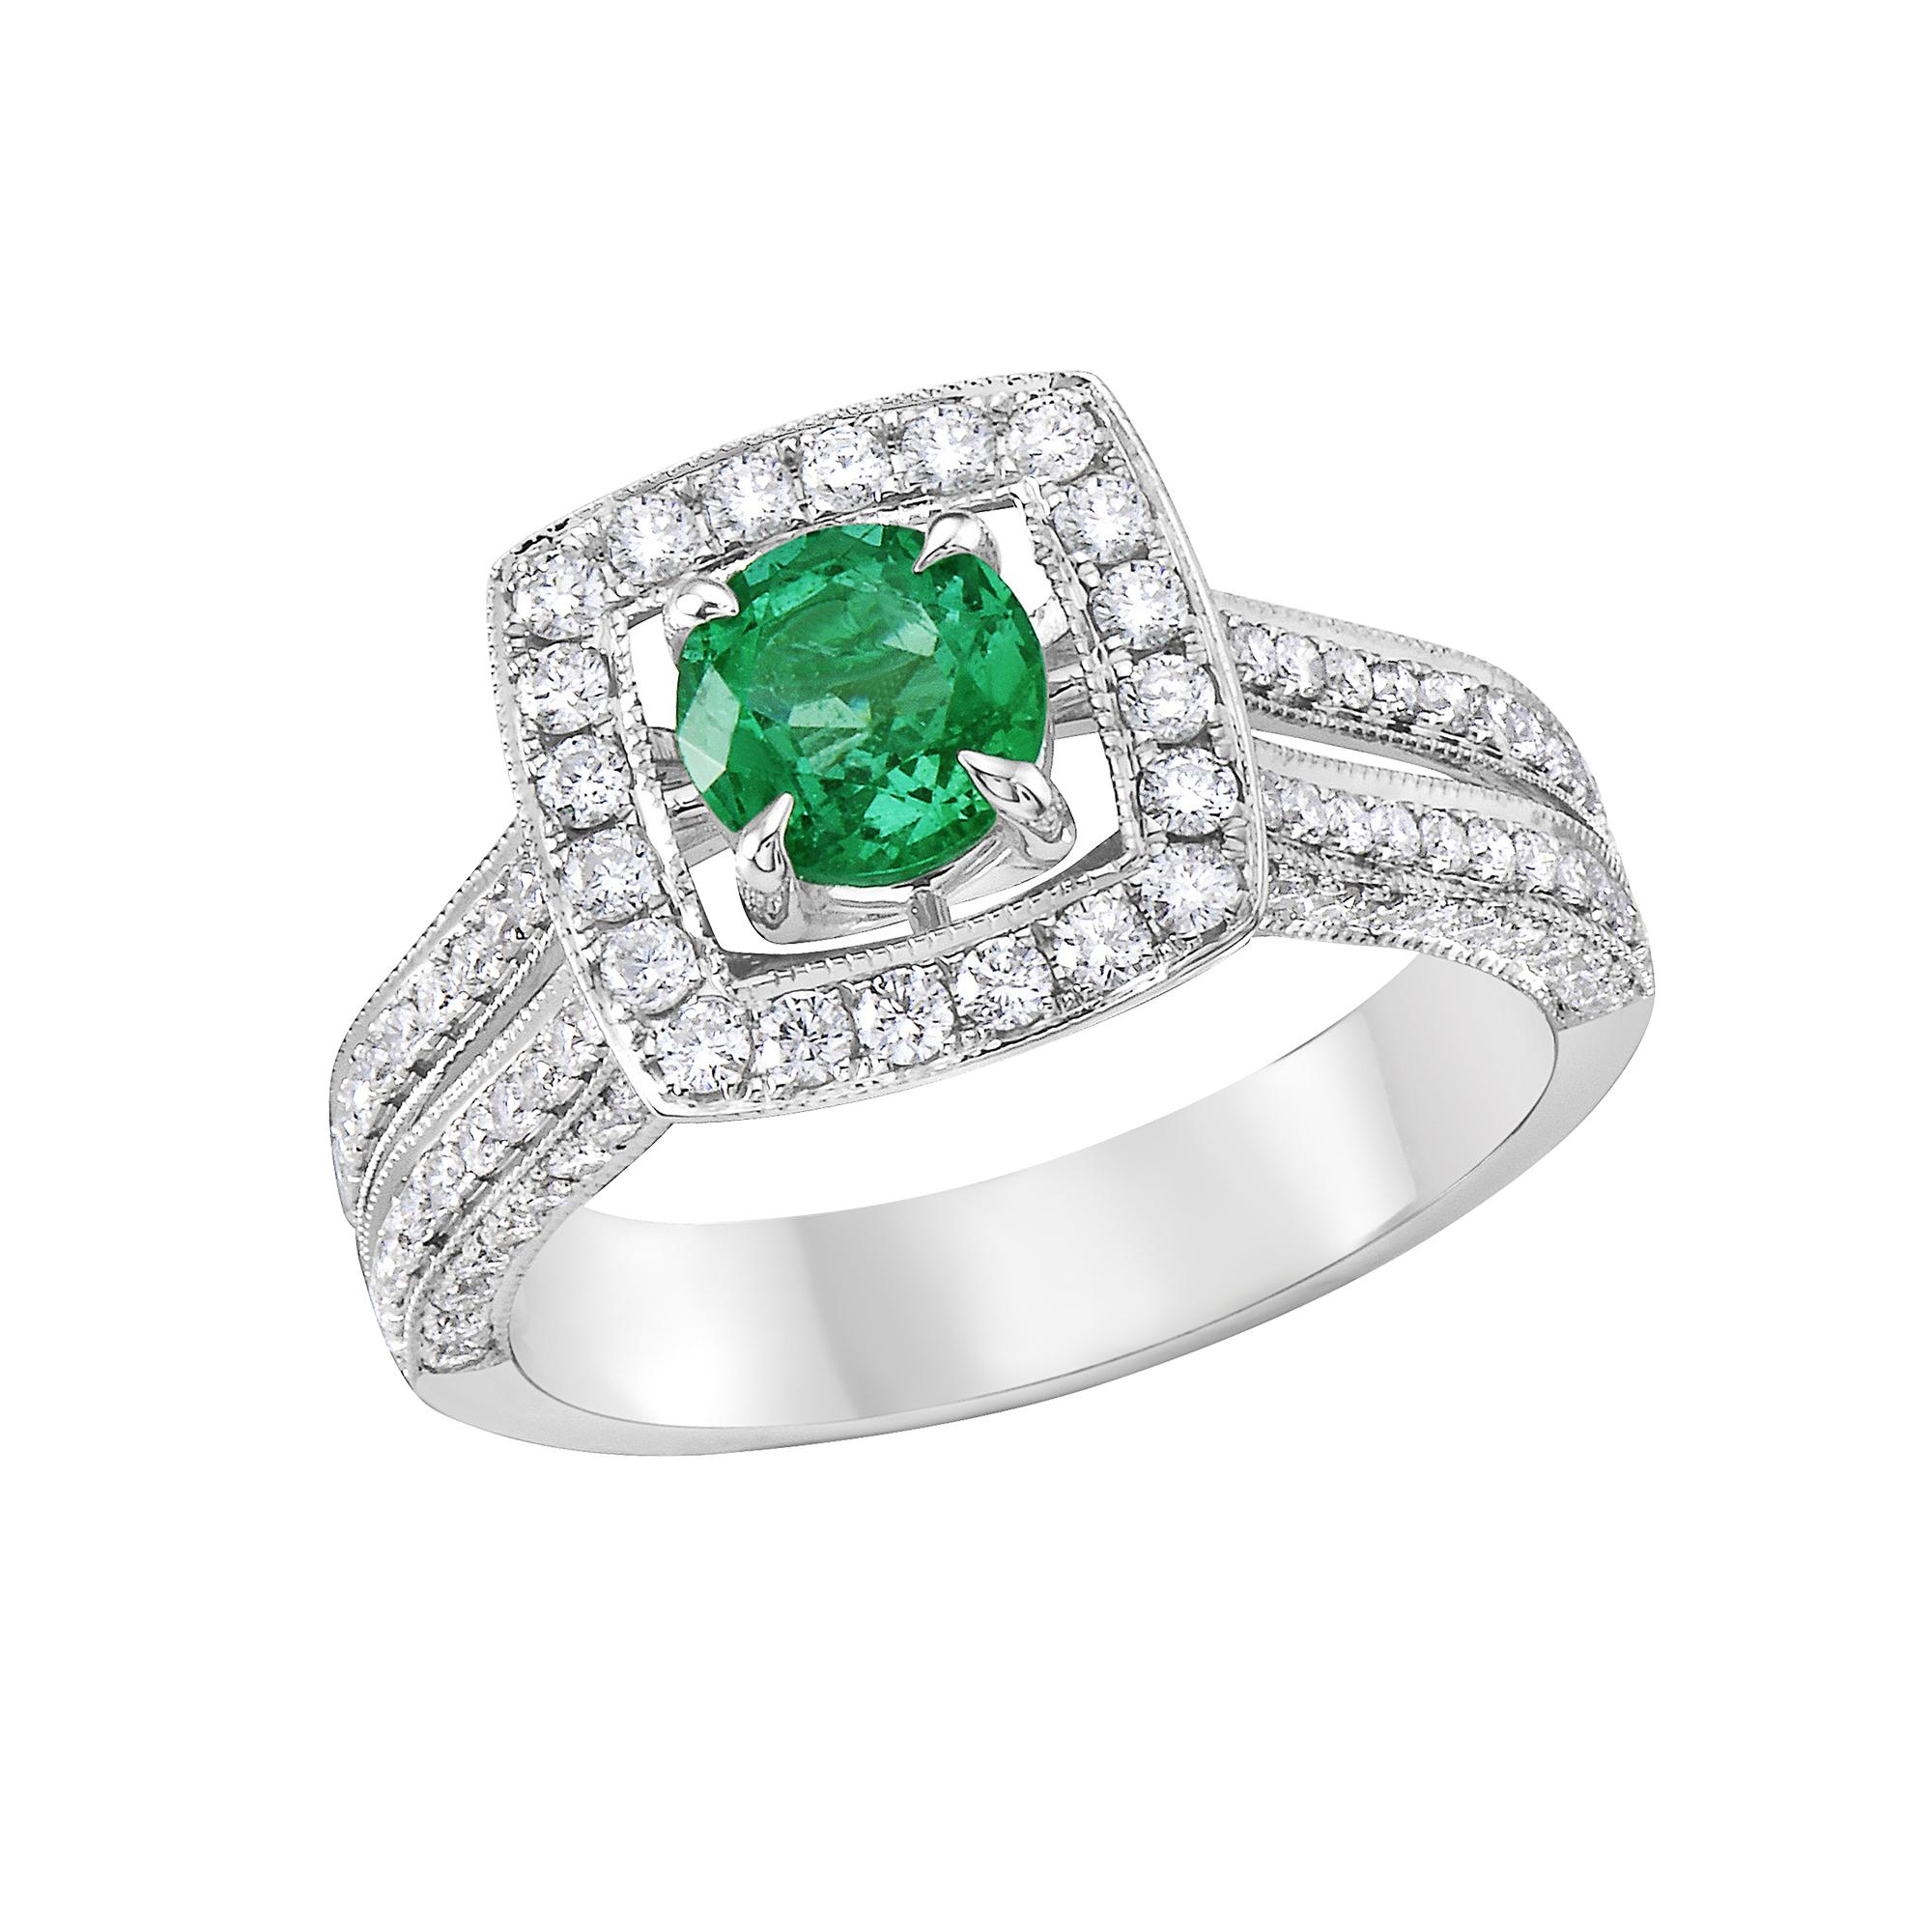 Elegant Emerald ring in Round shape bounded by Round diamonds at all sides and corners.

Secure Yours Today: Limited stock available. Don't miss the chance to secure your Emerald Diamond Ring today. It's not just a ring; it's a way of